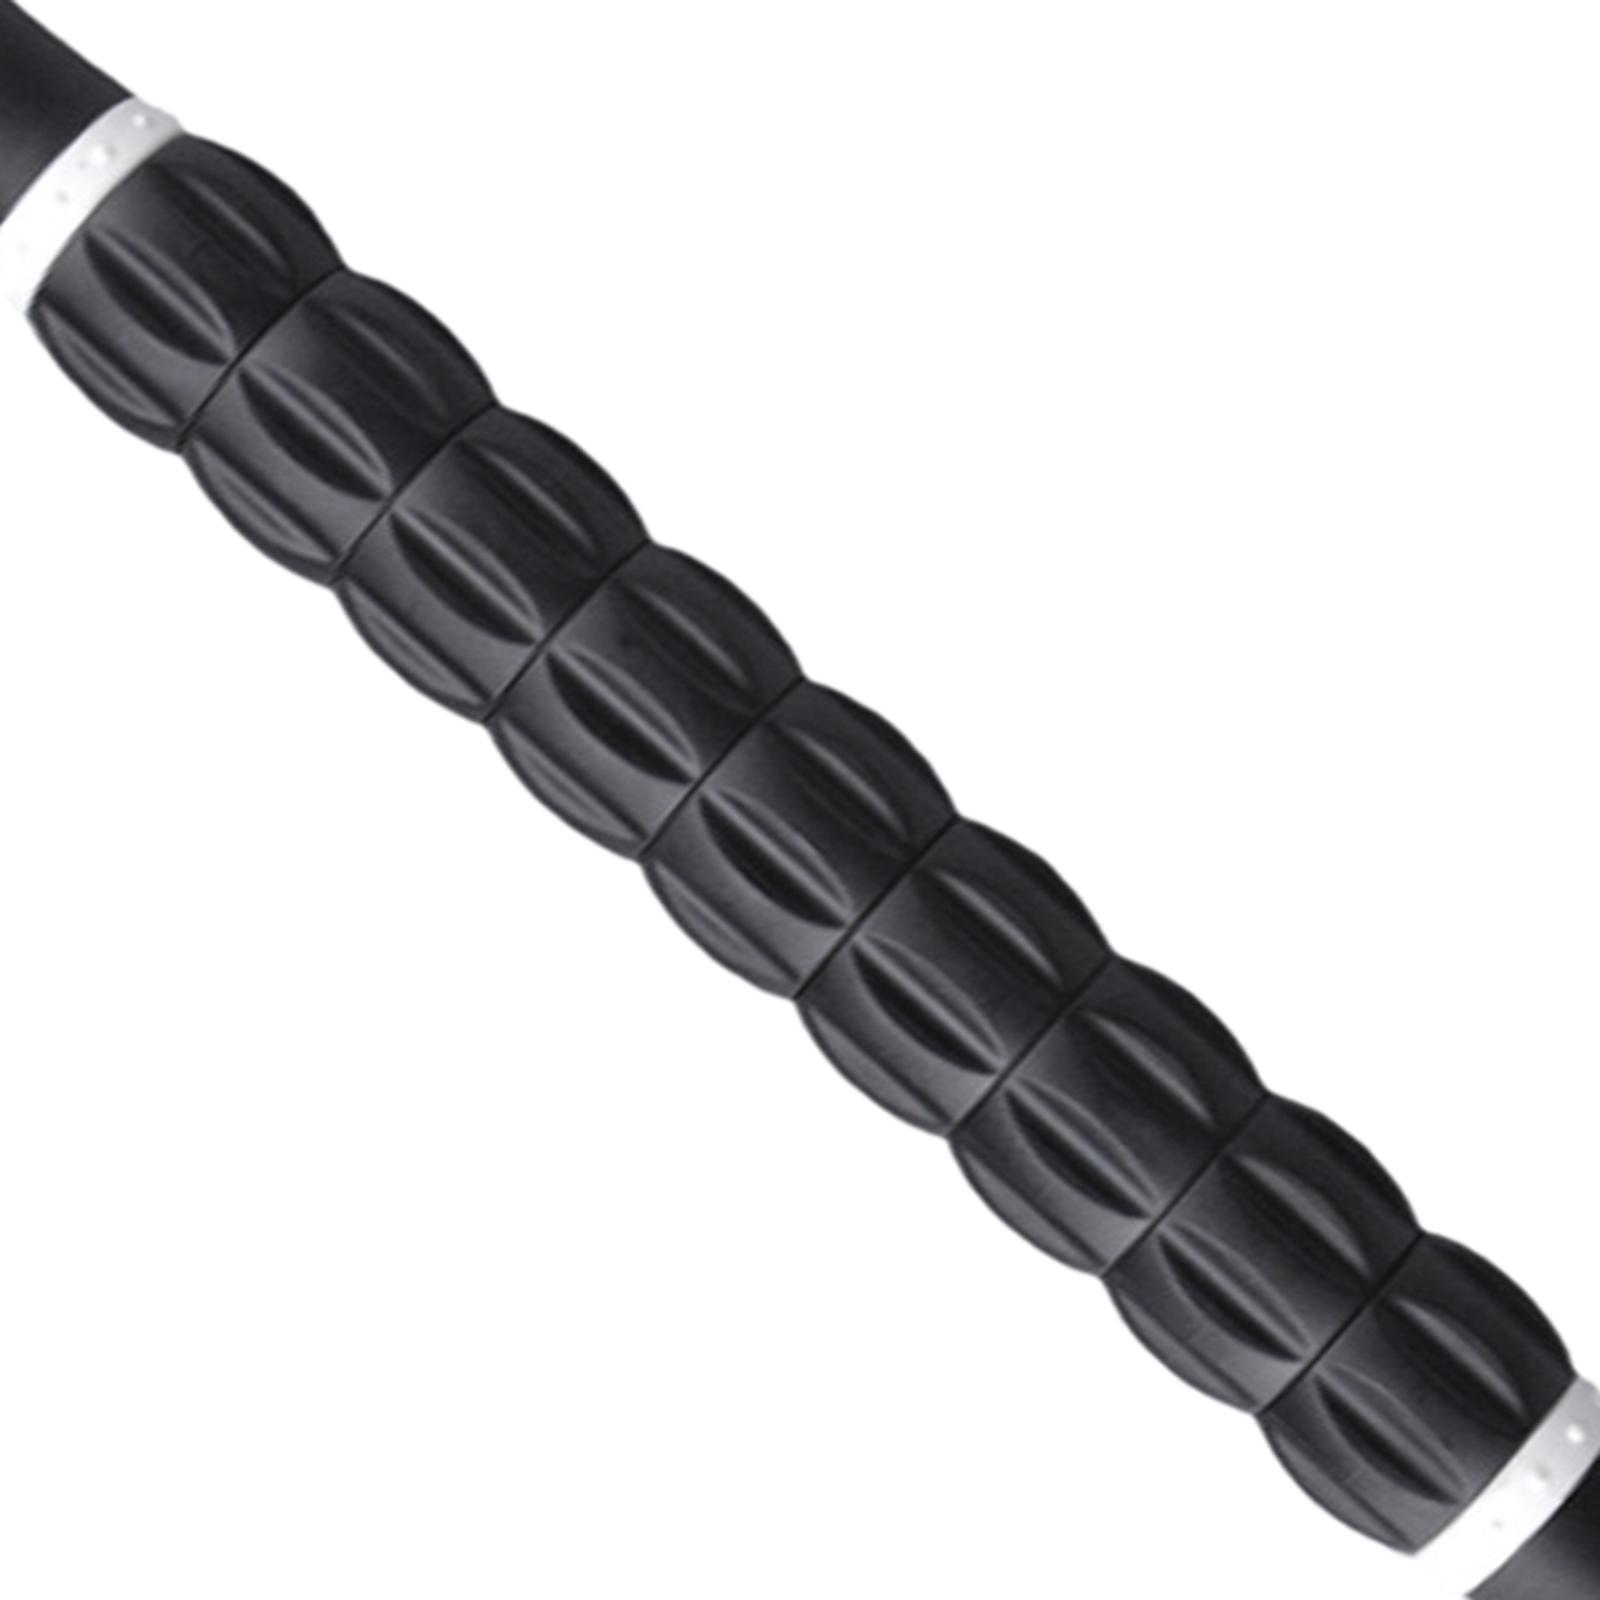 Muscle Roller Massage Stick for Athletes 17" Body Massager Black White